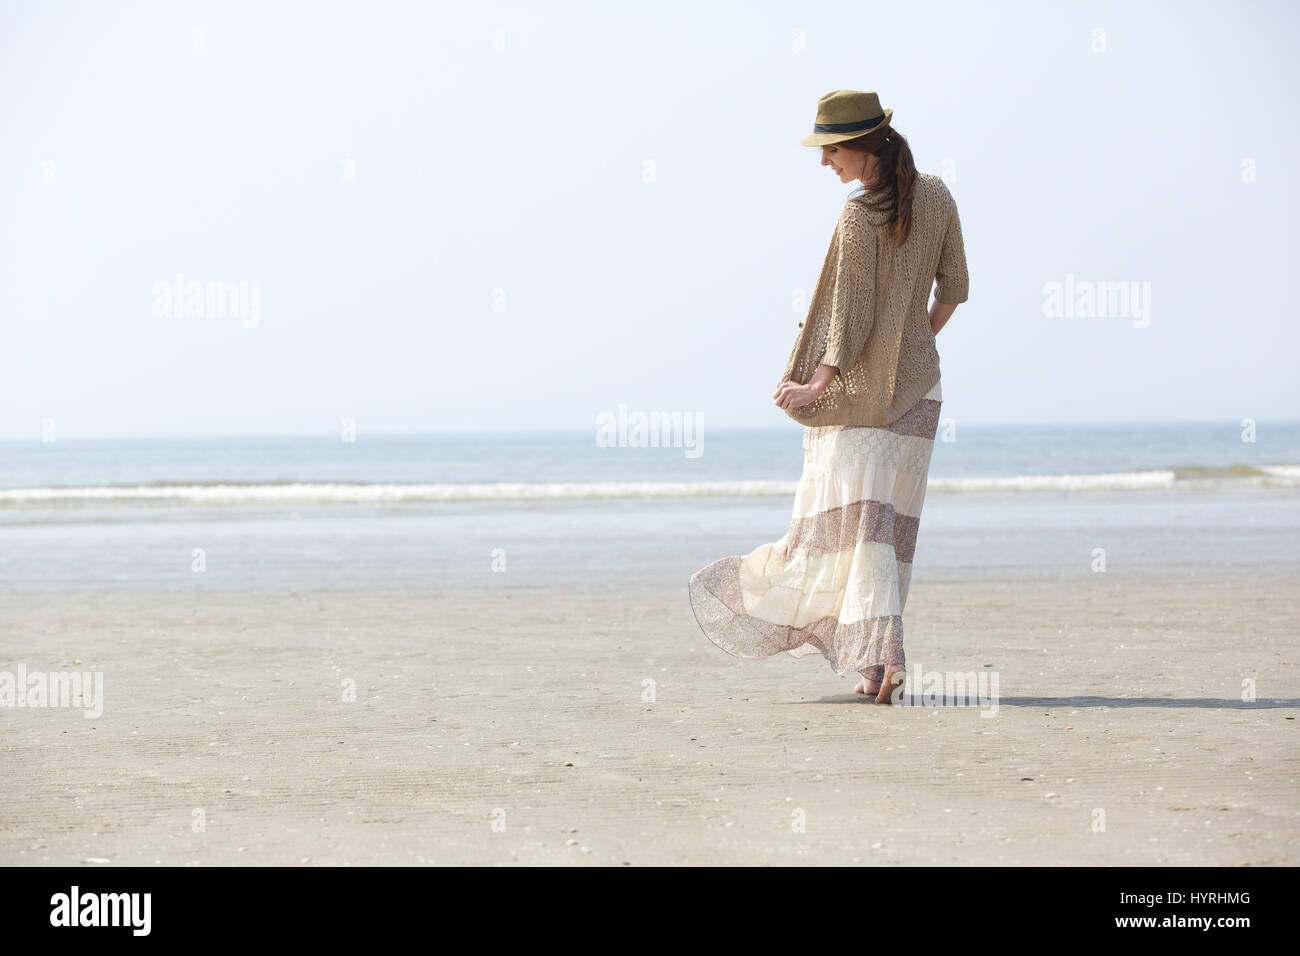 Rear view portrait of a beautiful woman walking on the beach Stock Photo